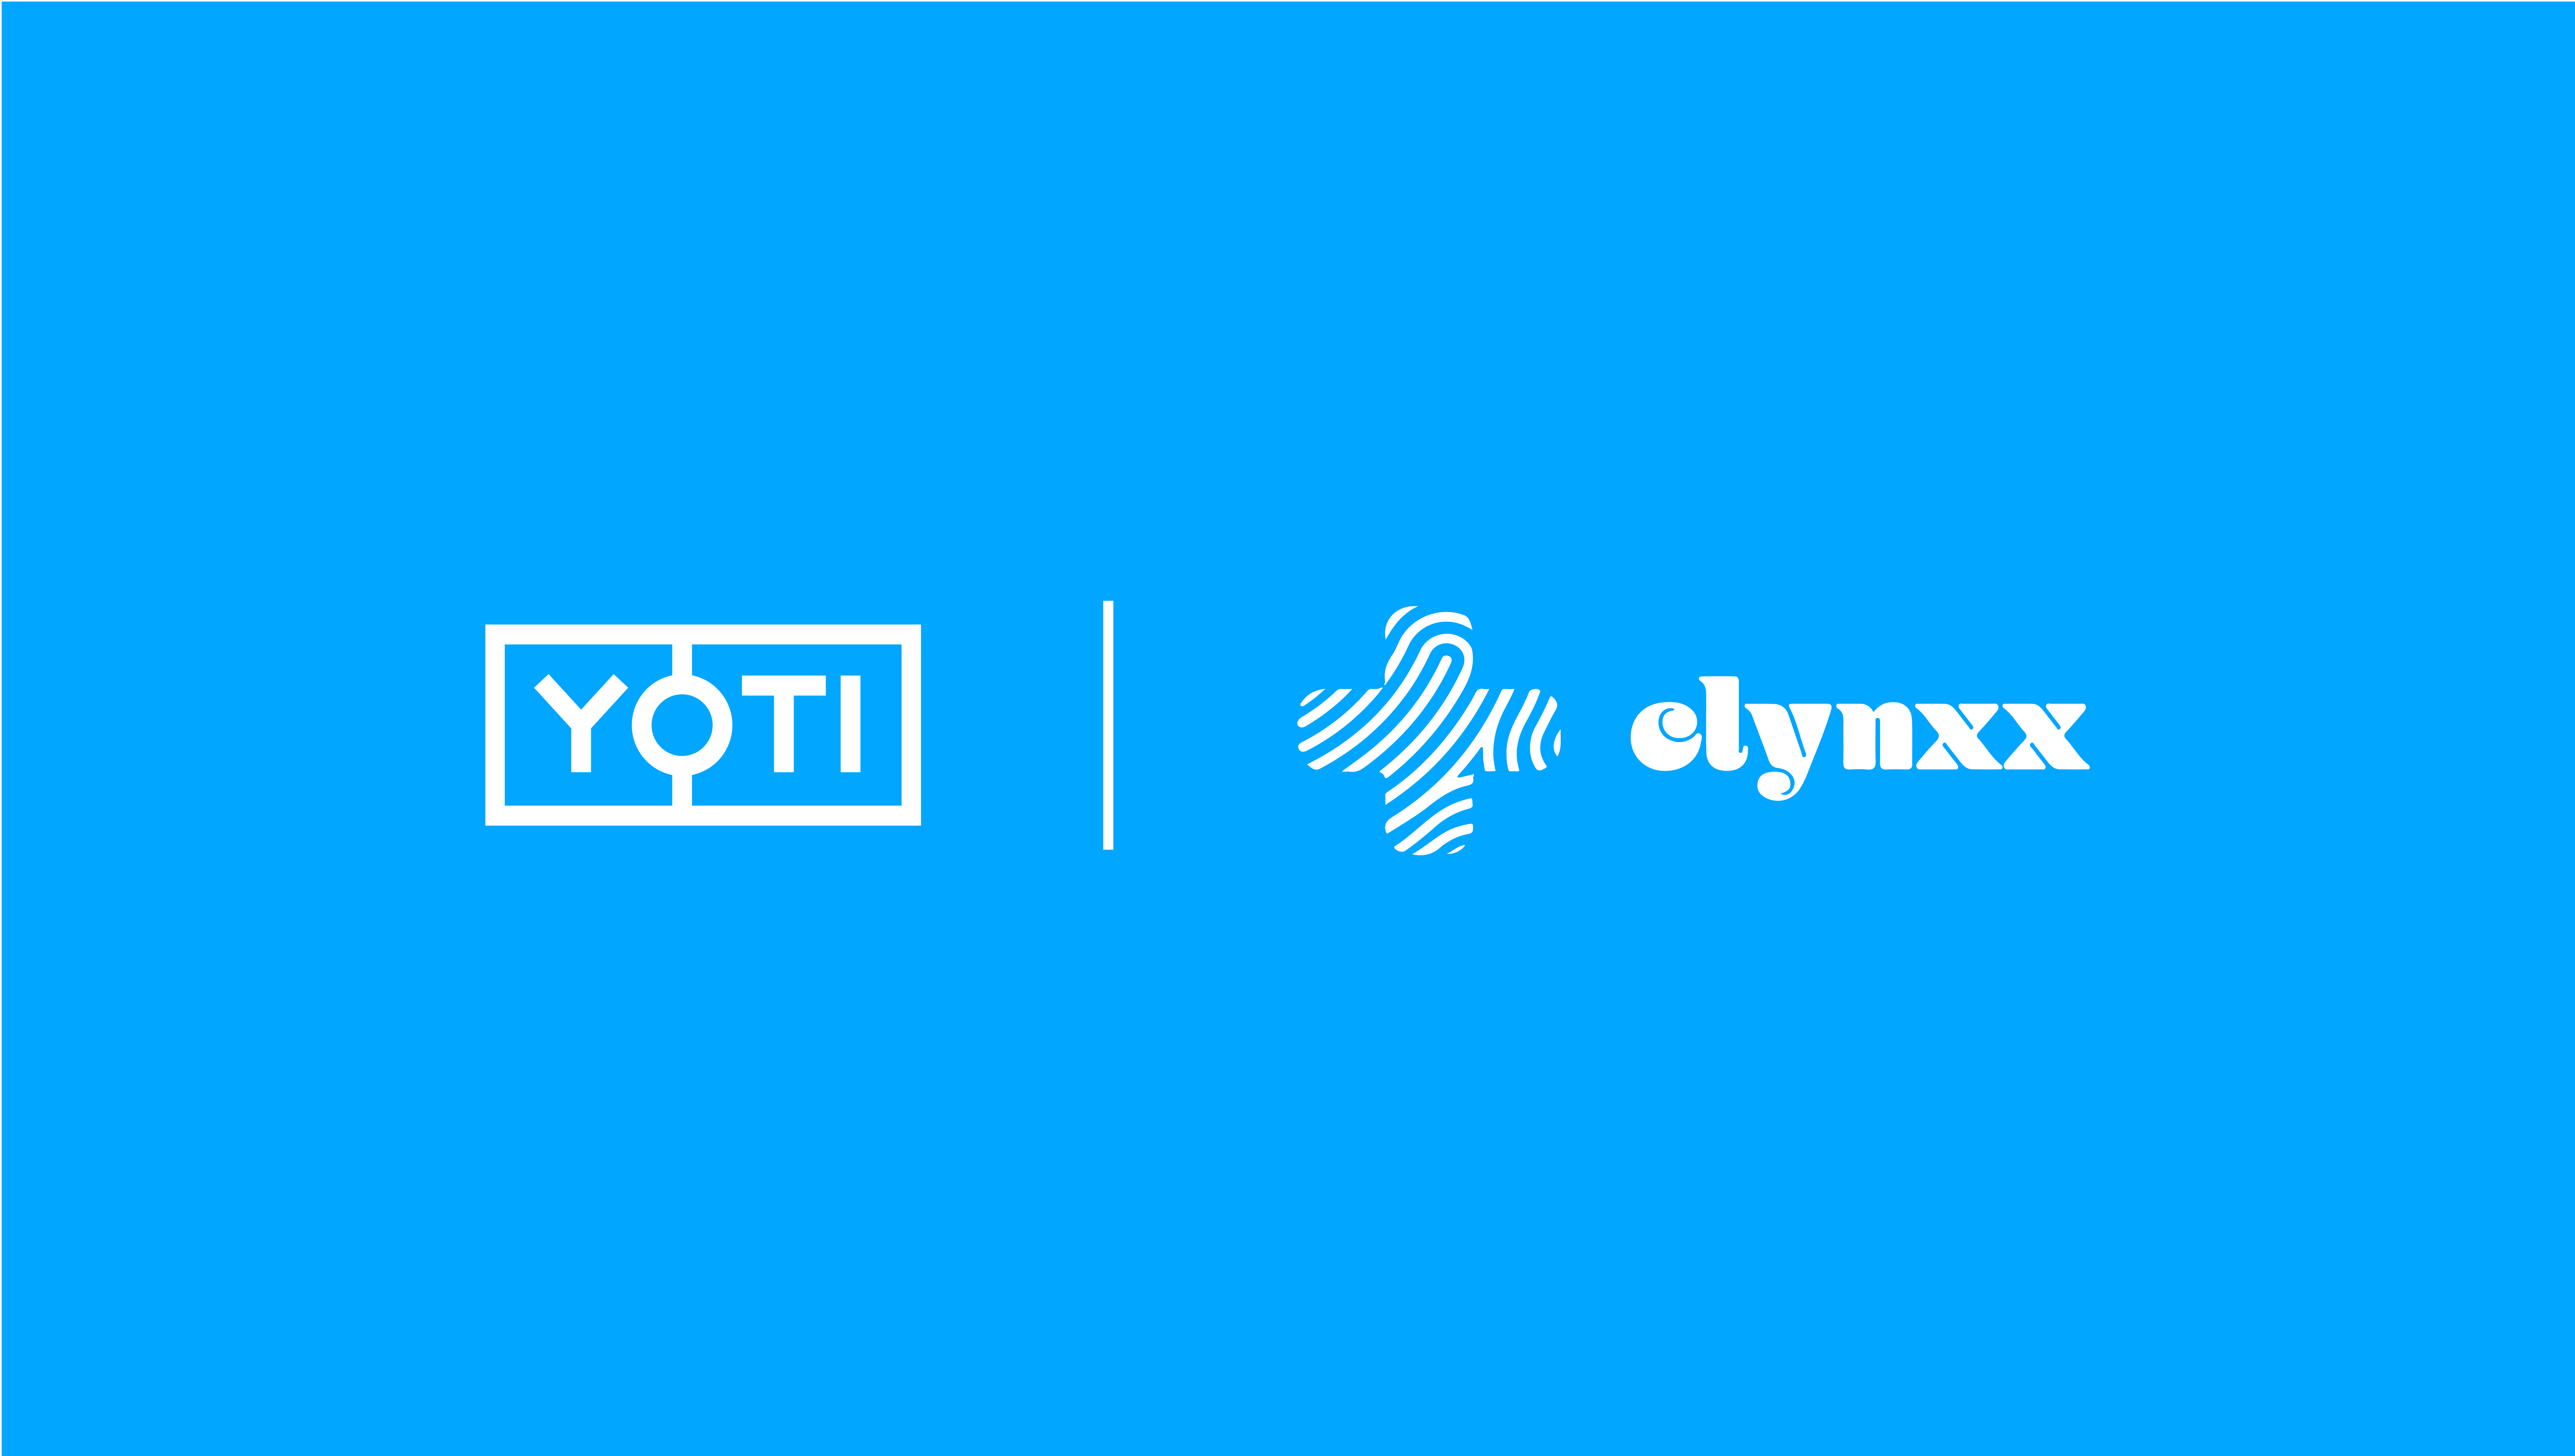 Yoti and Clynxx logos presented together